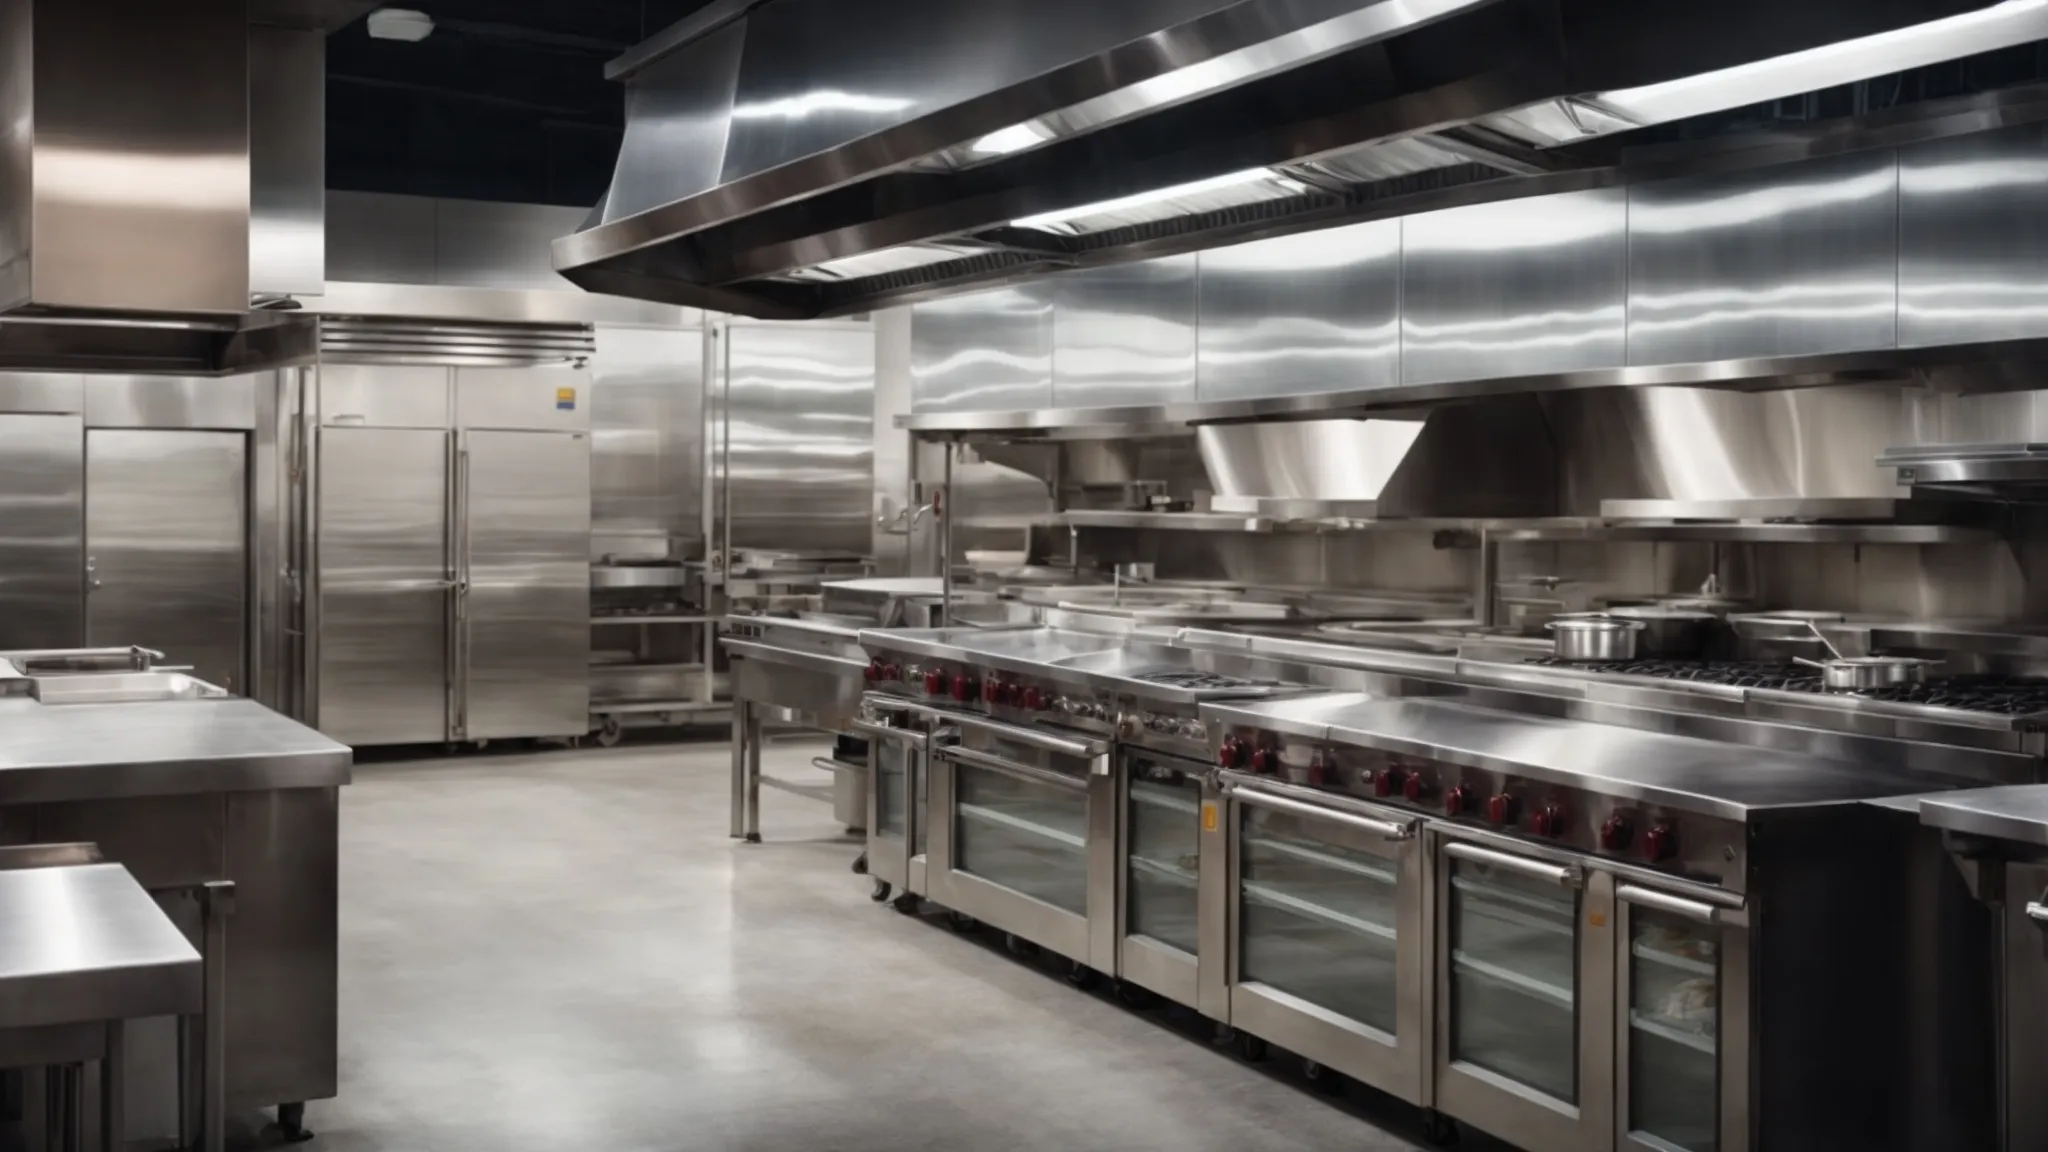 a commercial kitchen gleaming under bright lights, with a focus on the expansive, stainless steel hood system.